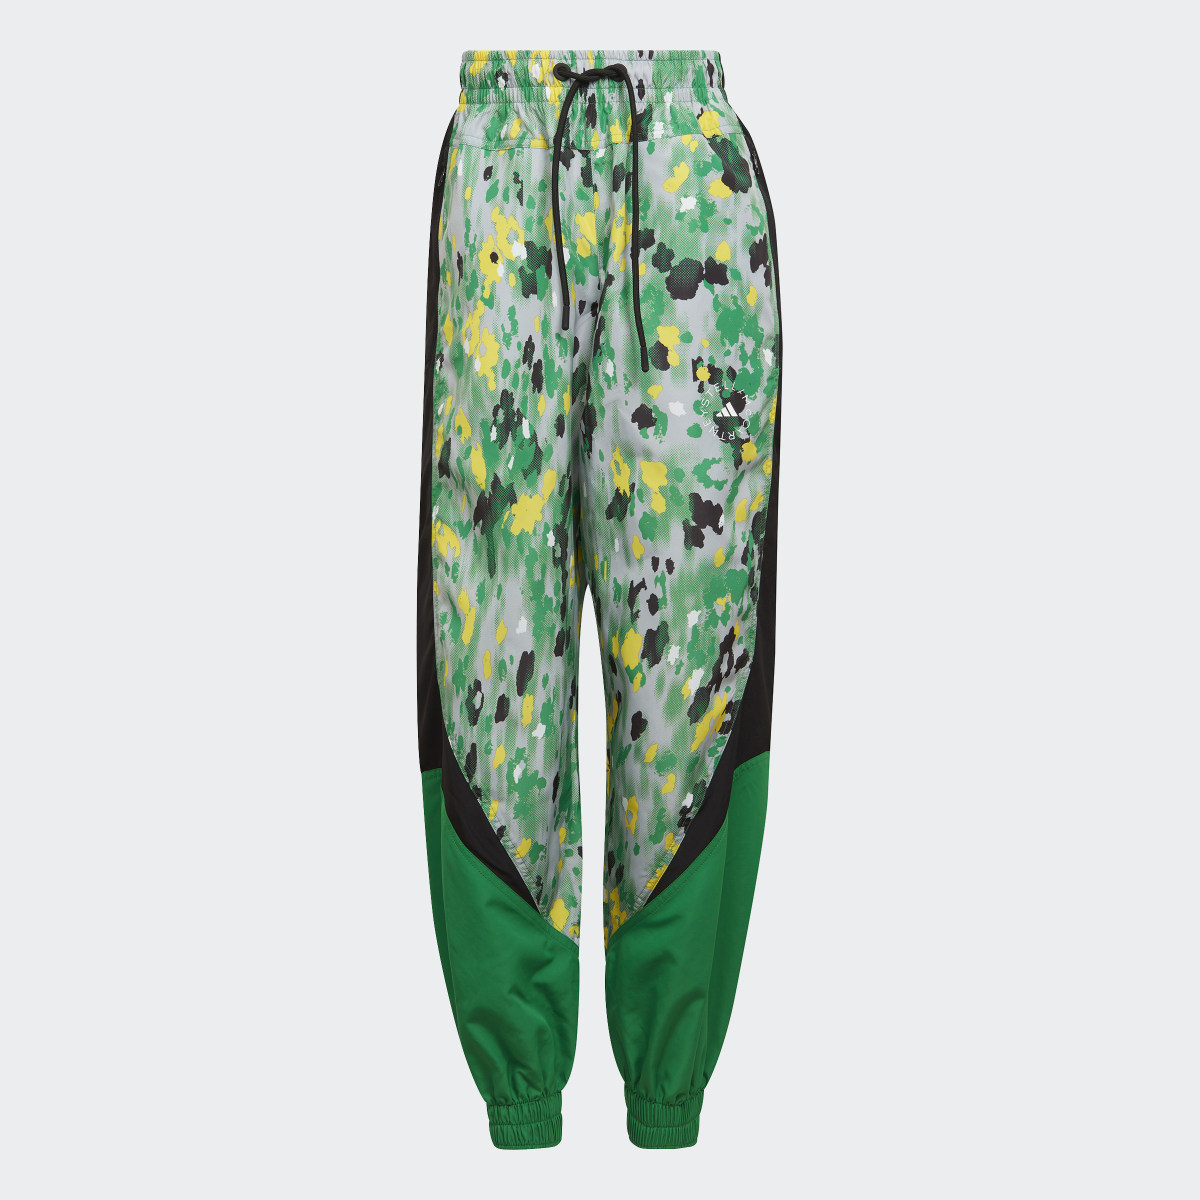 Adidas by Stella McCartney Printed Woven Tracksuit Bottoms. 7